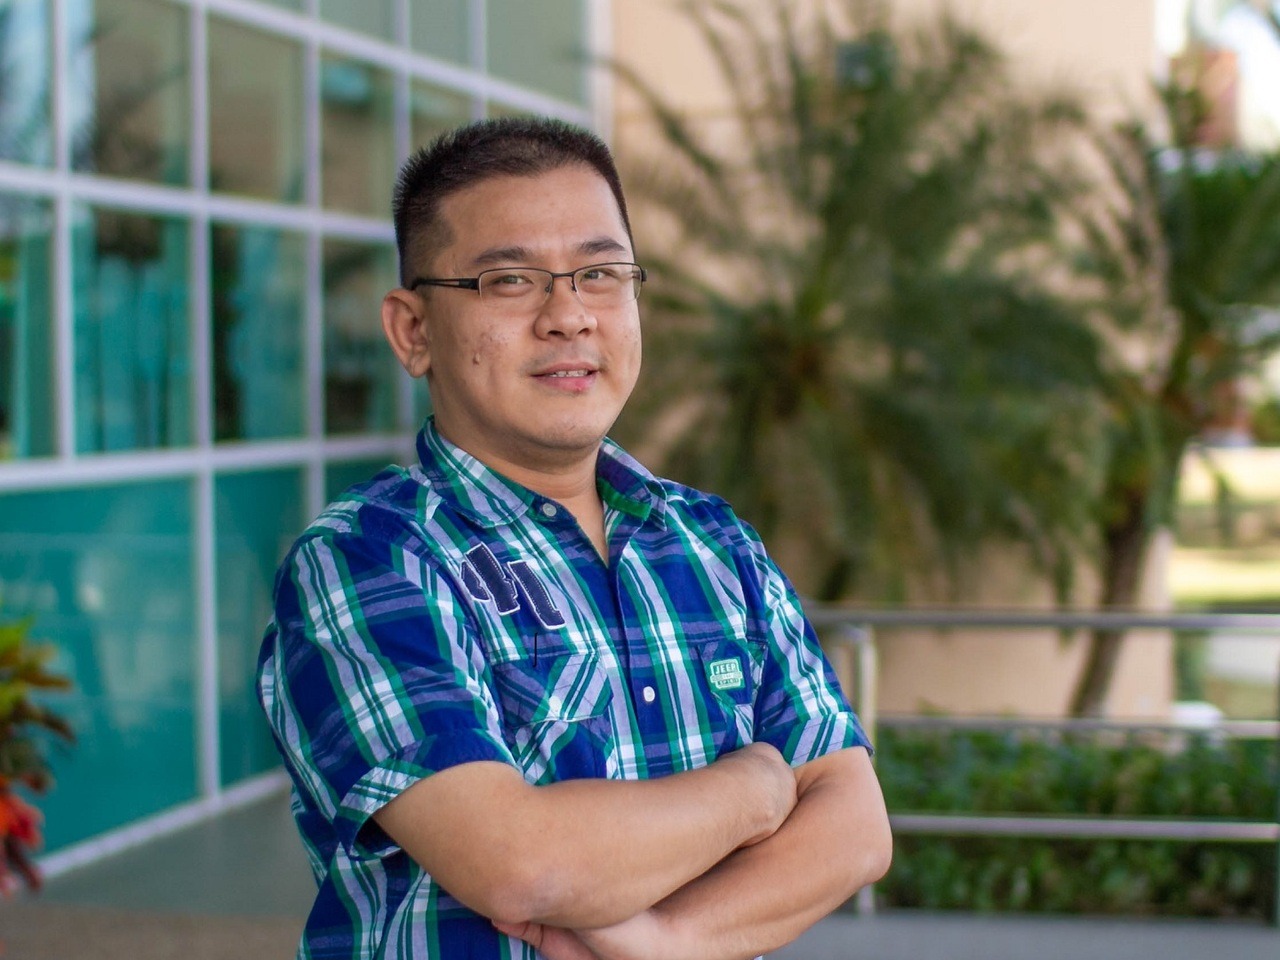 “Working at Curtin Malaysia is an excellent stage in my career path. I am quite familiar with Curtin as I took my PhD at Curtin Perth and I frequently visit the main campus to meet old friends. “I remember when I first arrived at Curtin Malaysia. It...